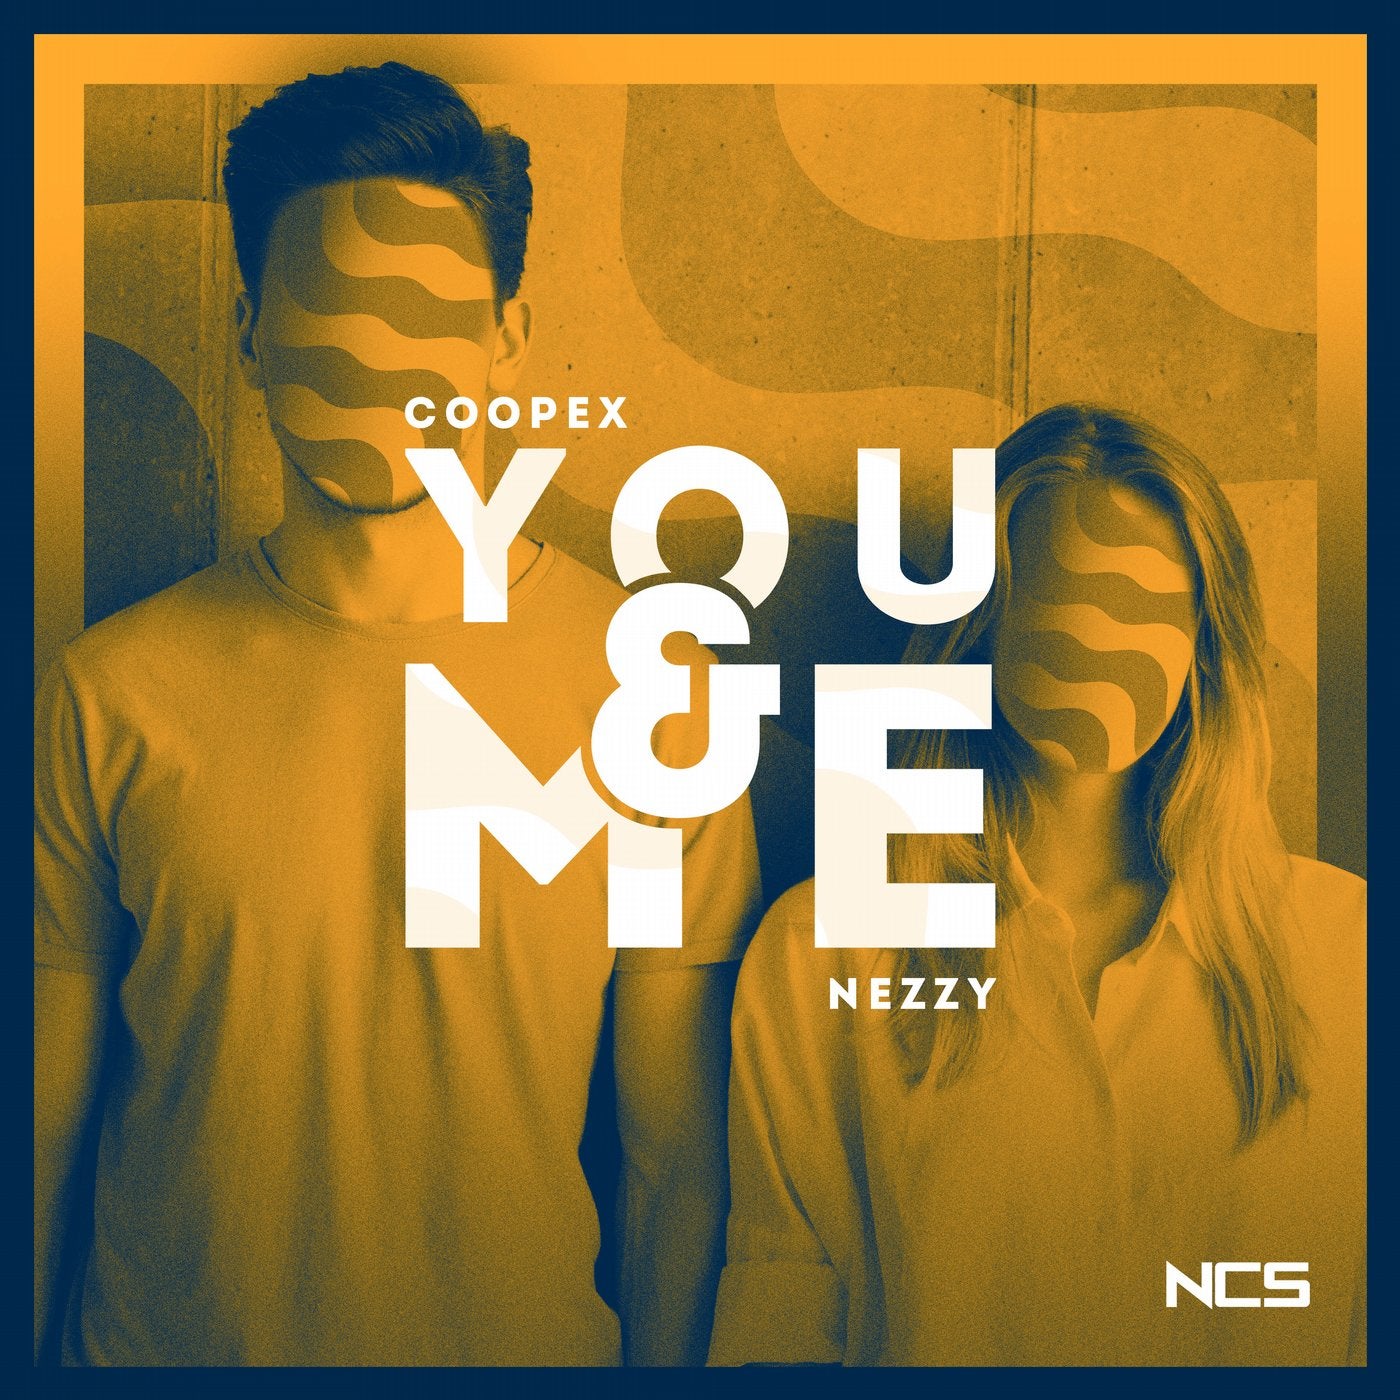 Coopex new beat. Coopex you and me. Me you картинки. Me and you обложка. You and me NCS обложка.